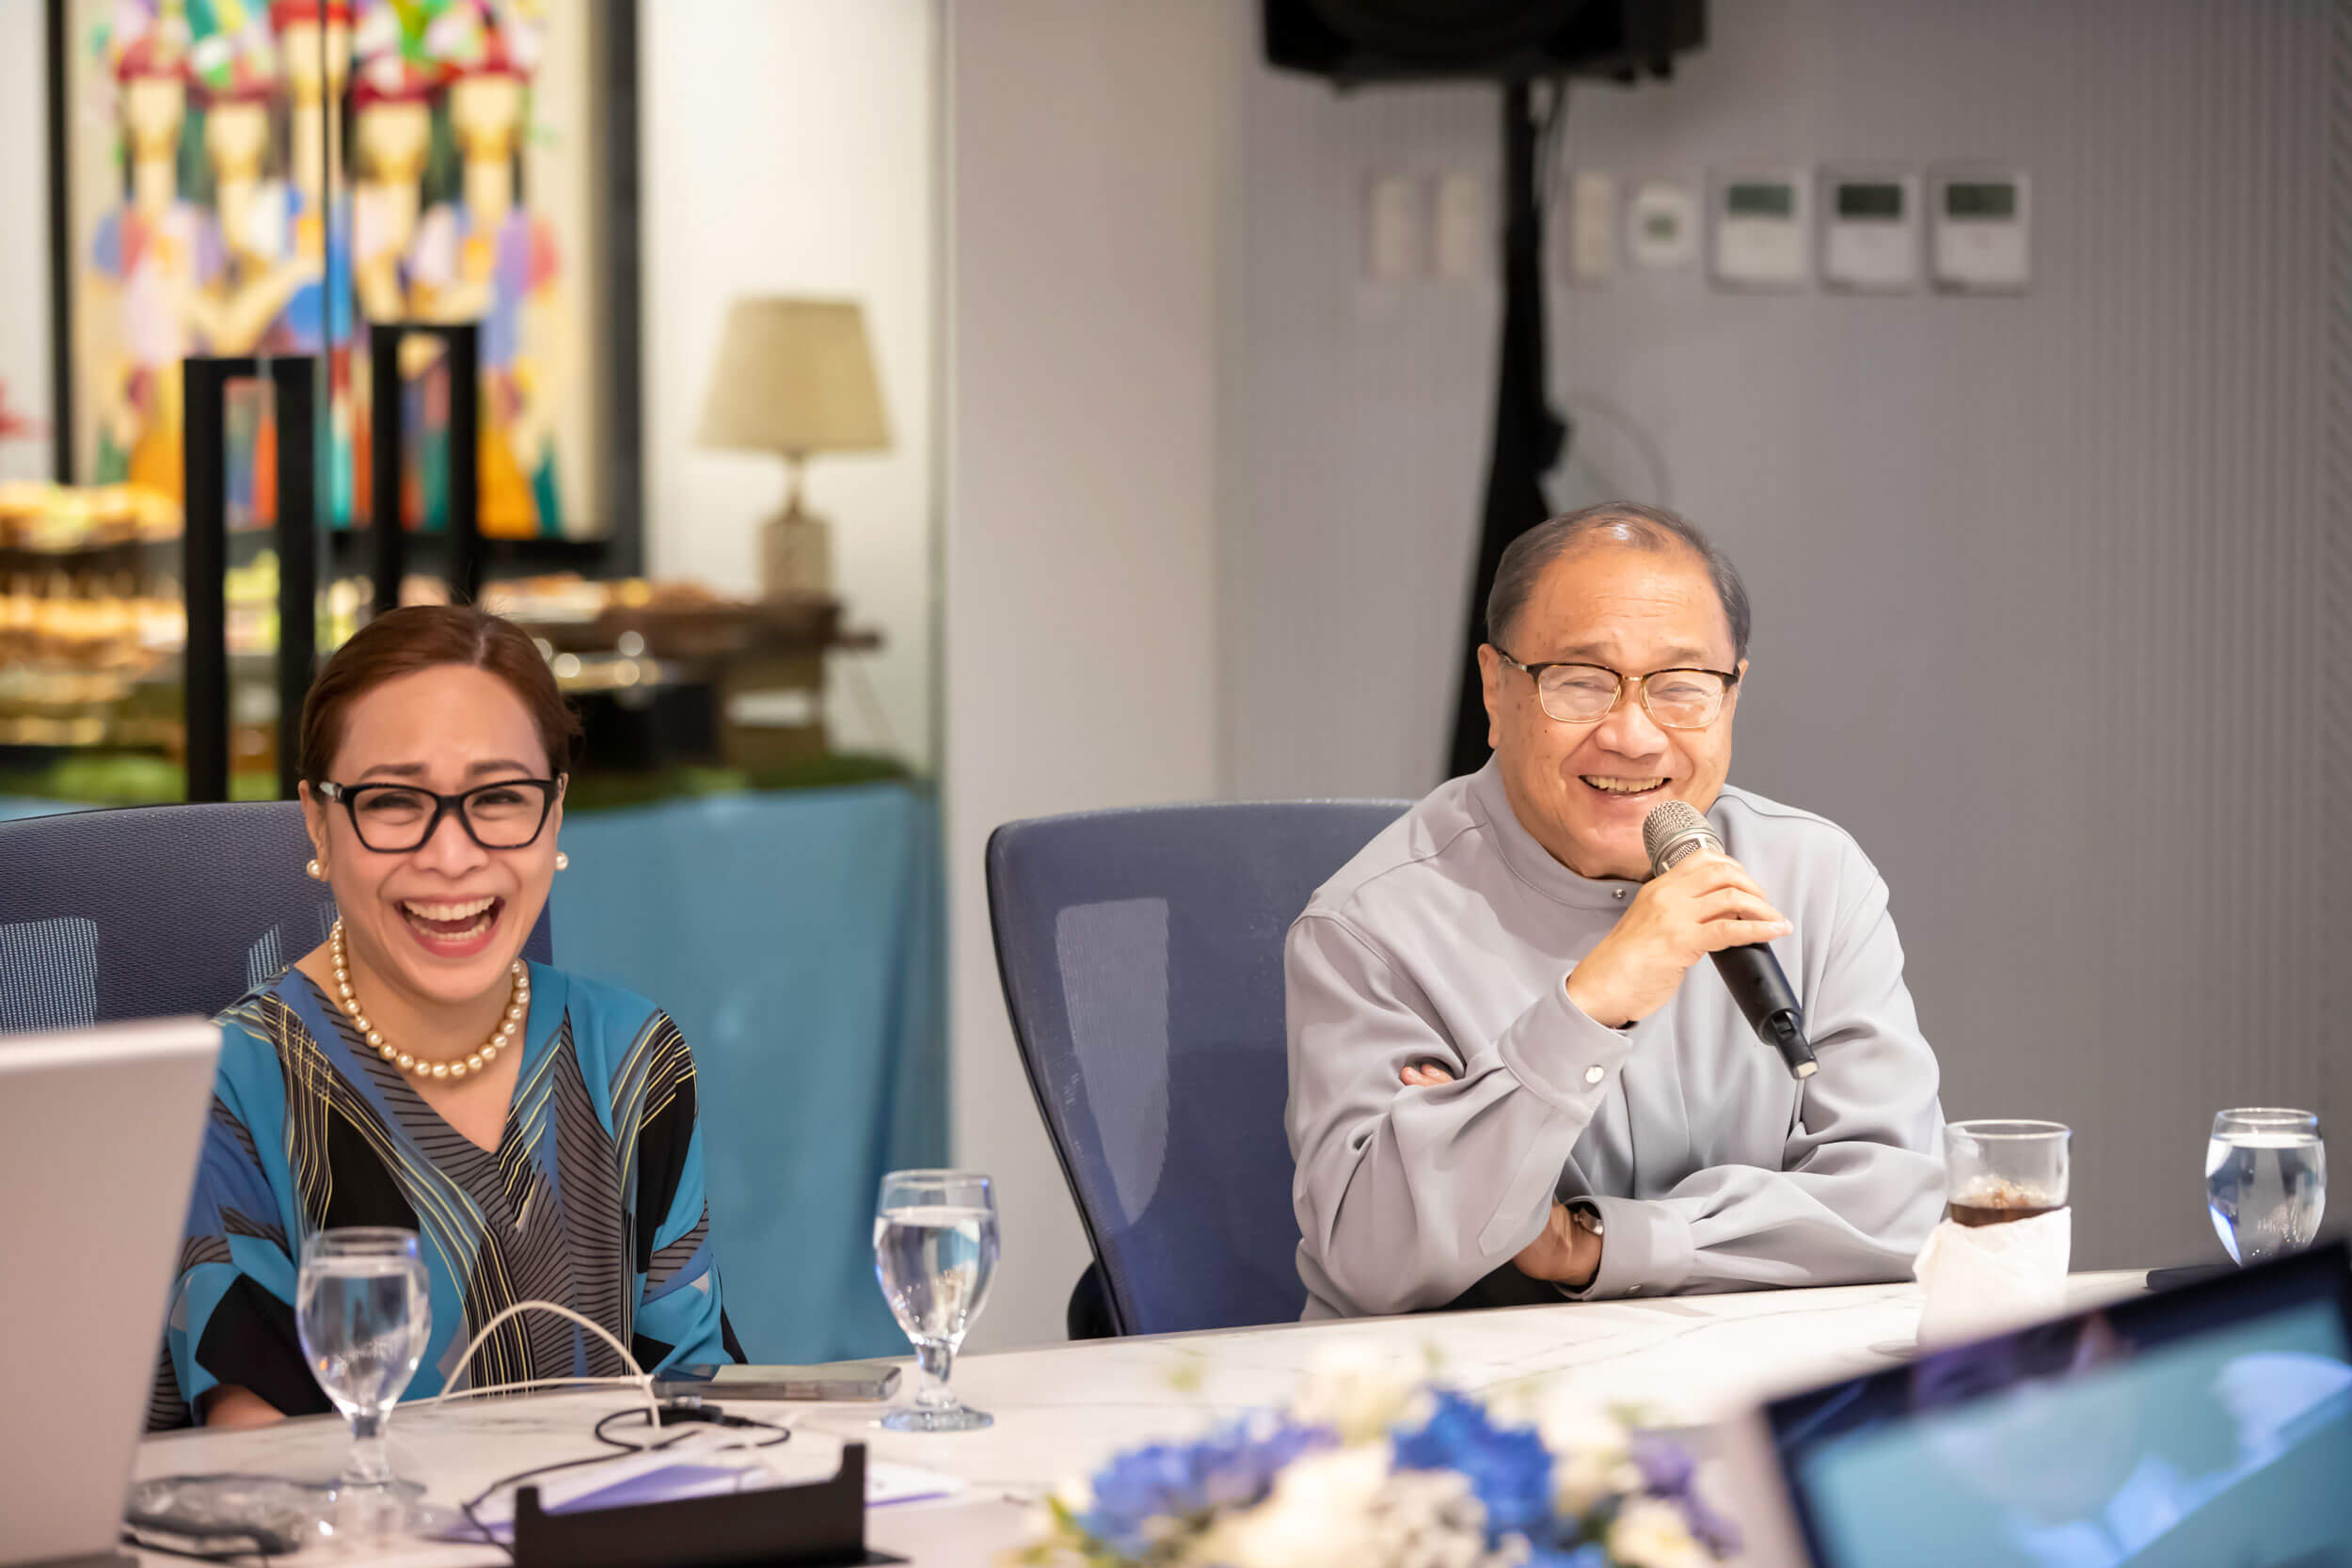 MPIC President, Chairman and CEO and mWell Chairman Manny V. Pangilinan and MPIC Chief Finance, Risk and Sustainability Officer and mWell CEO Chaye Cabal-Revilla.